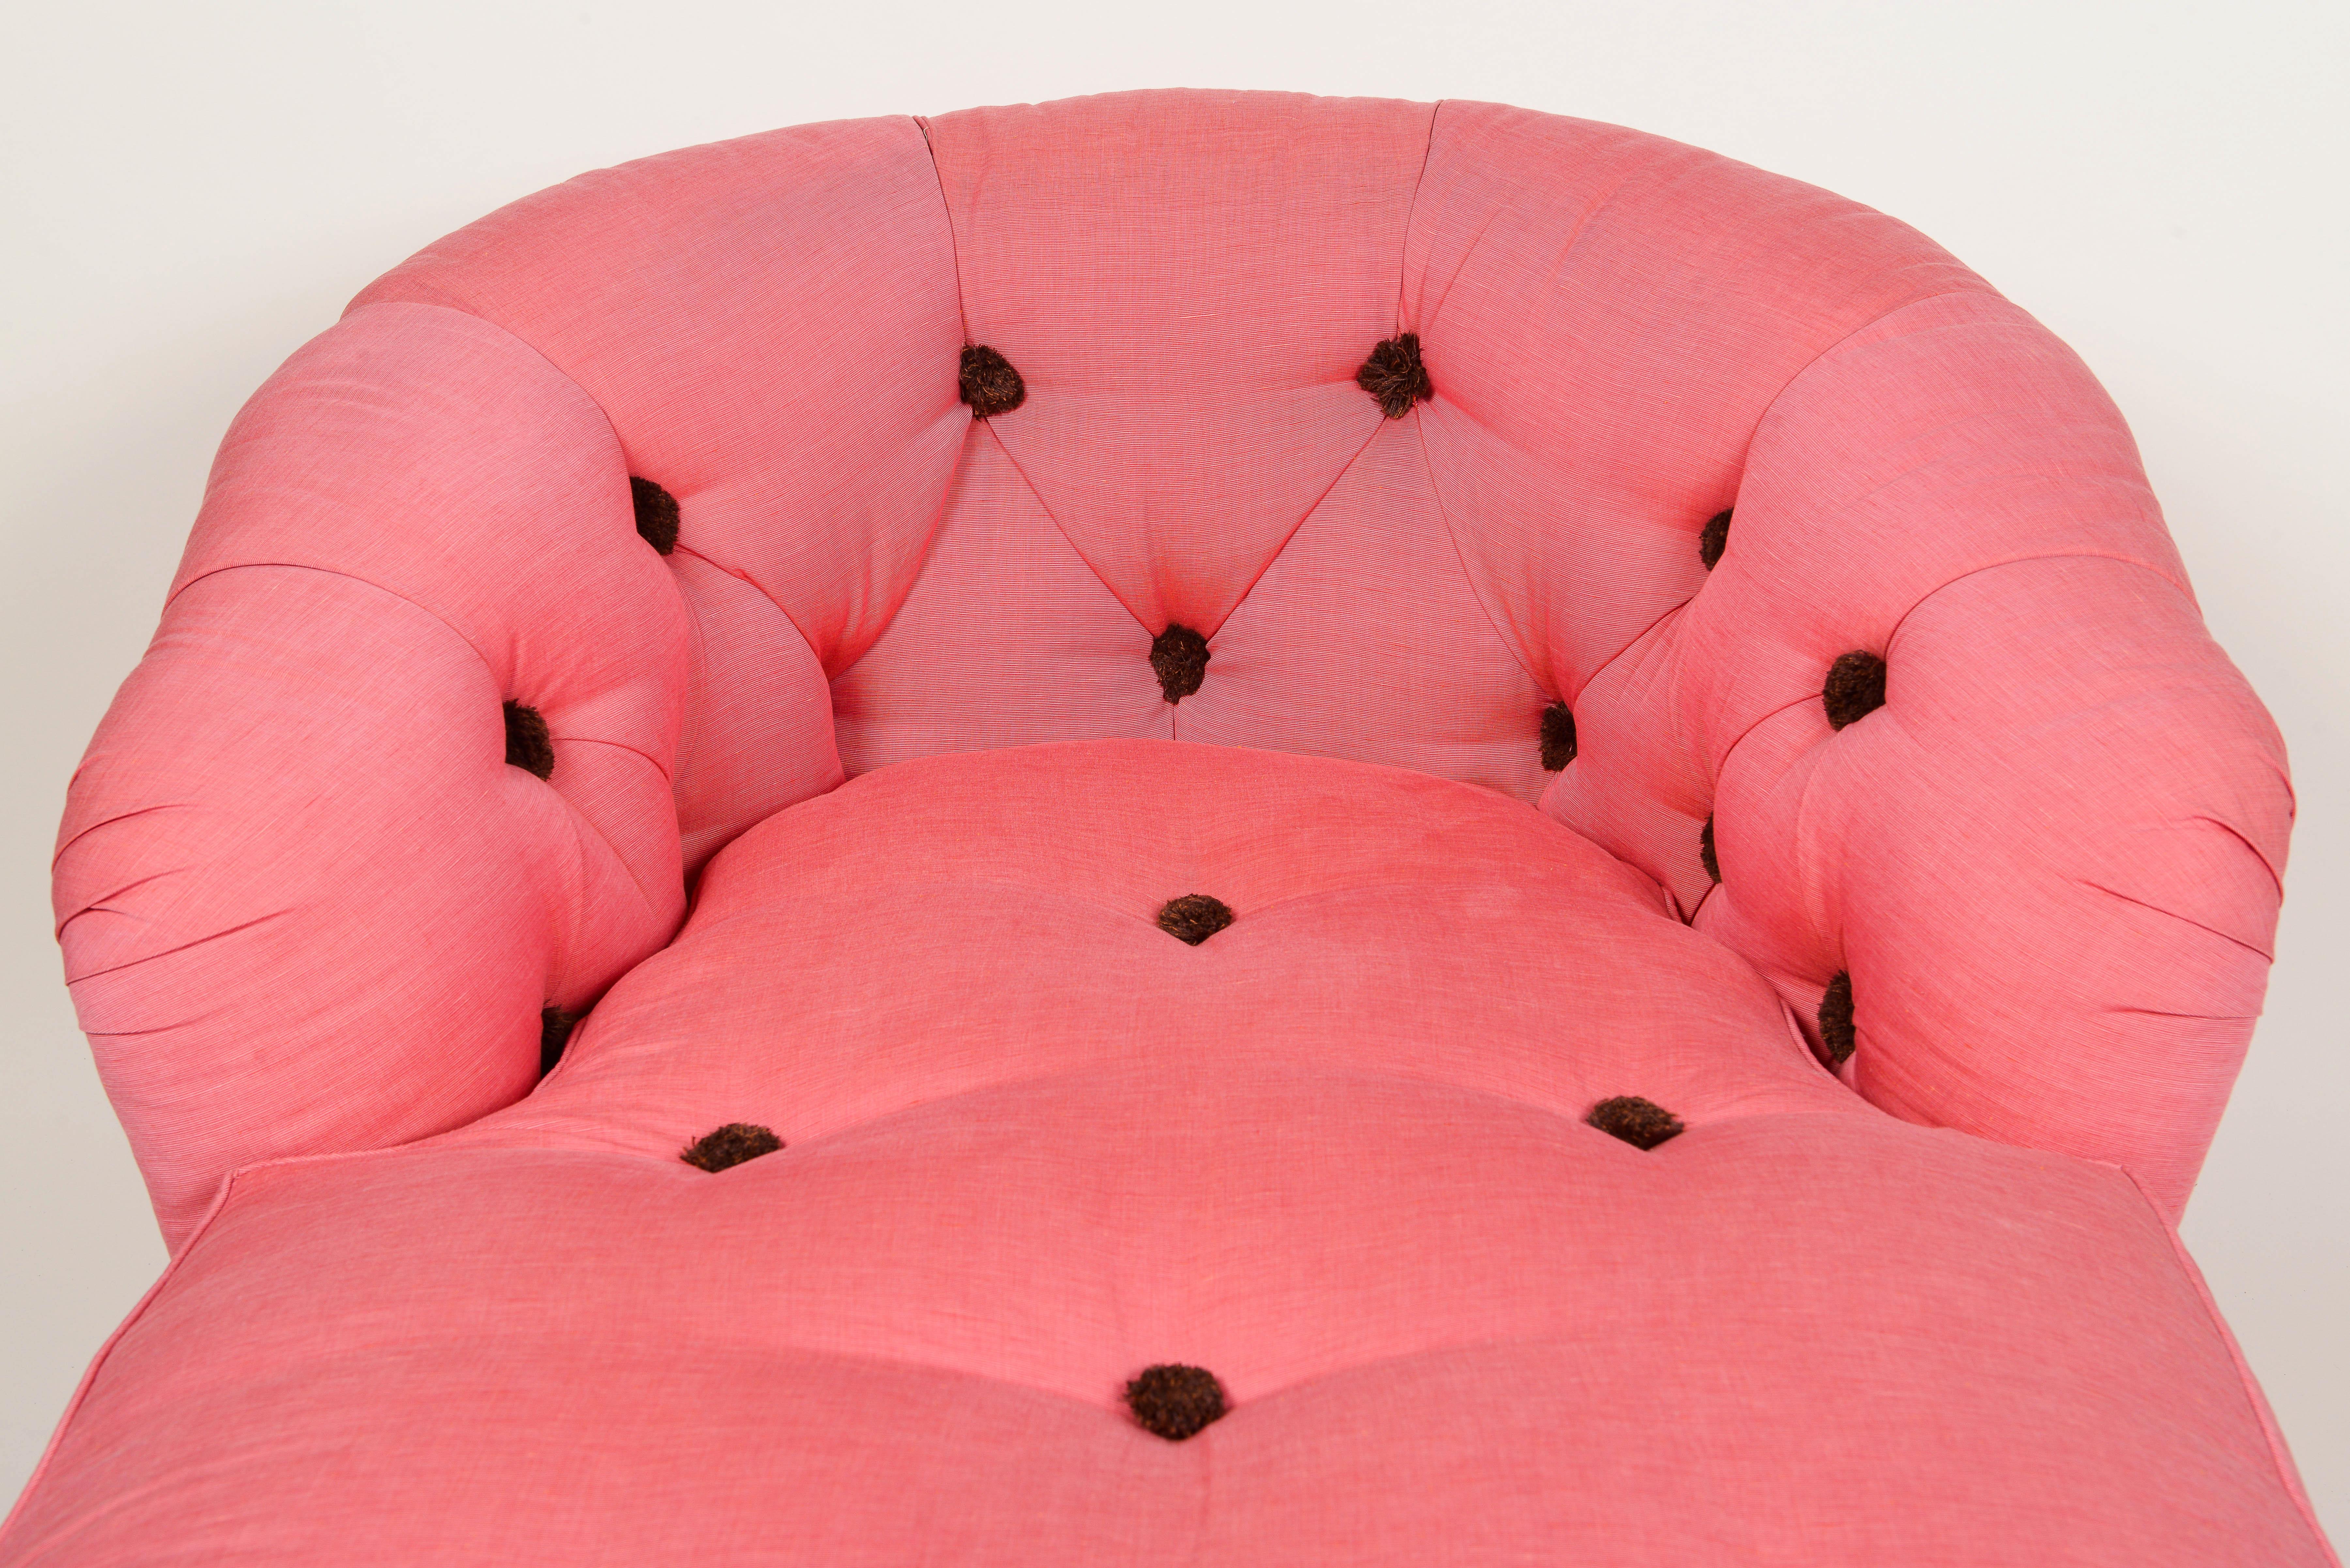 Upholstery Raspberry Cotton-Upholstered Tufted Chaise Longue